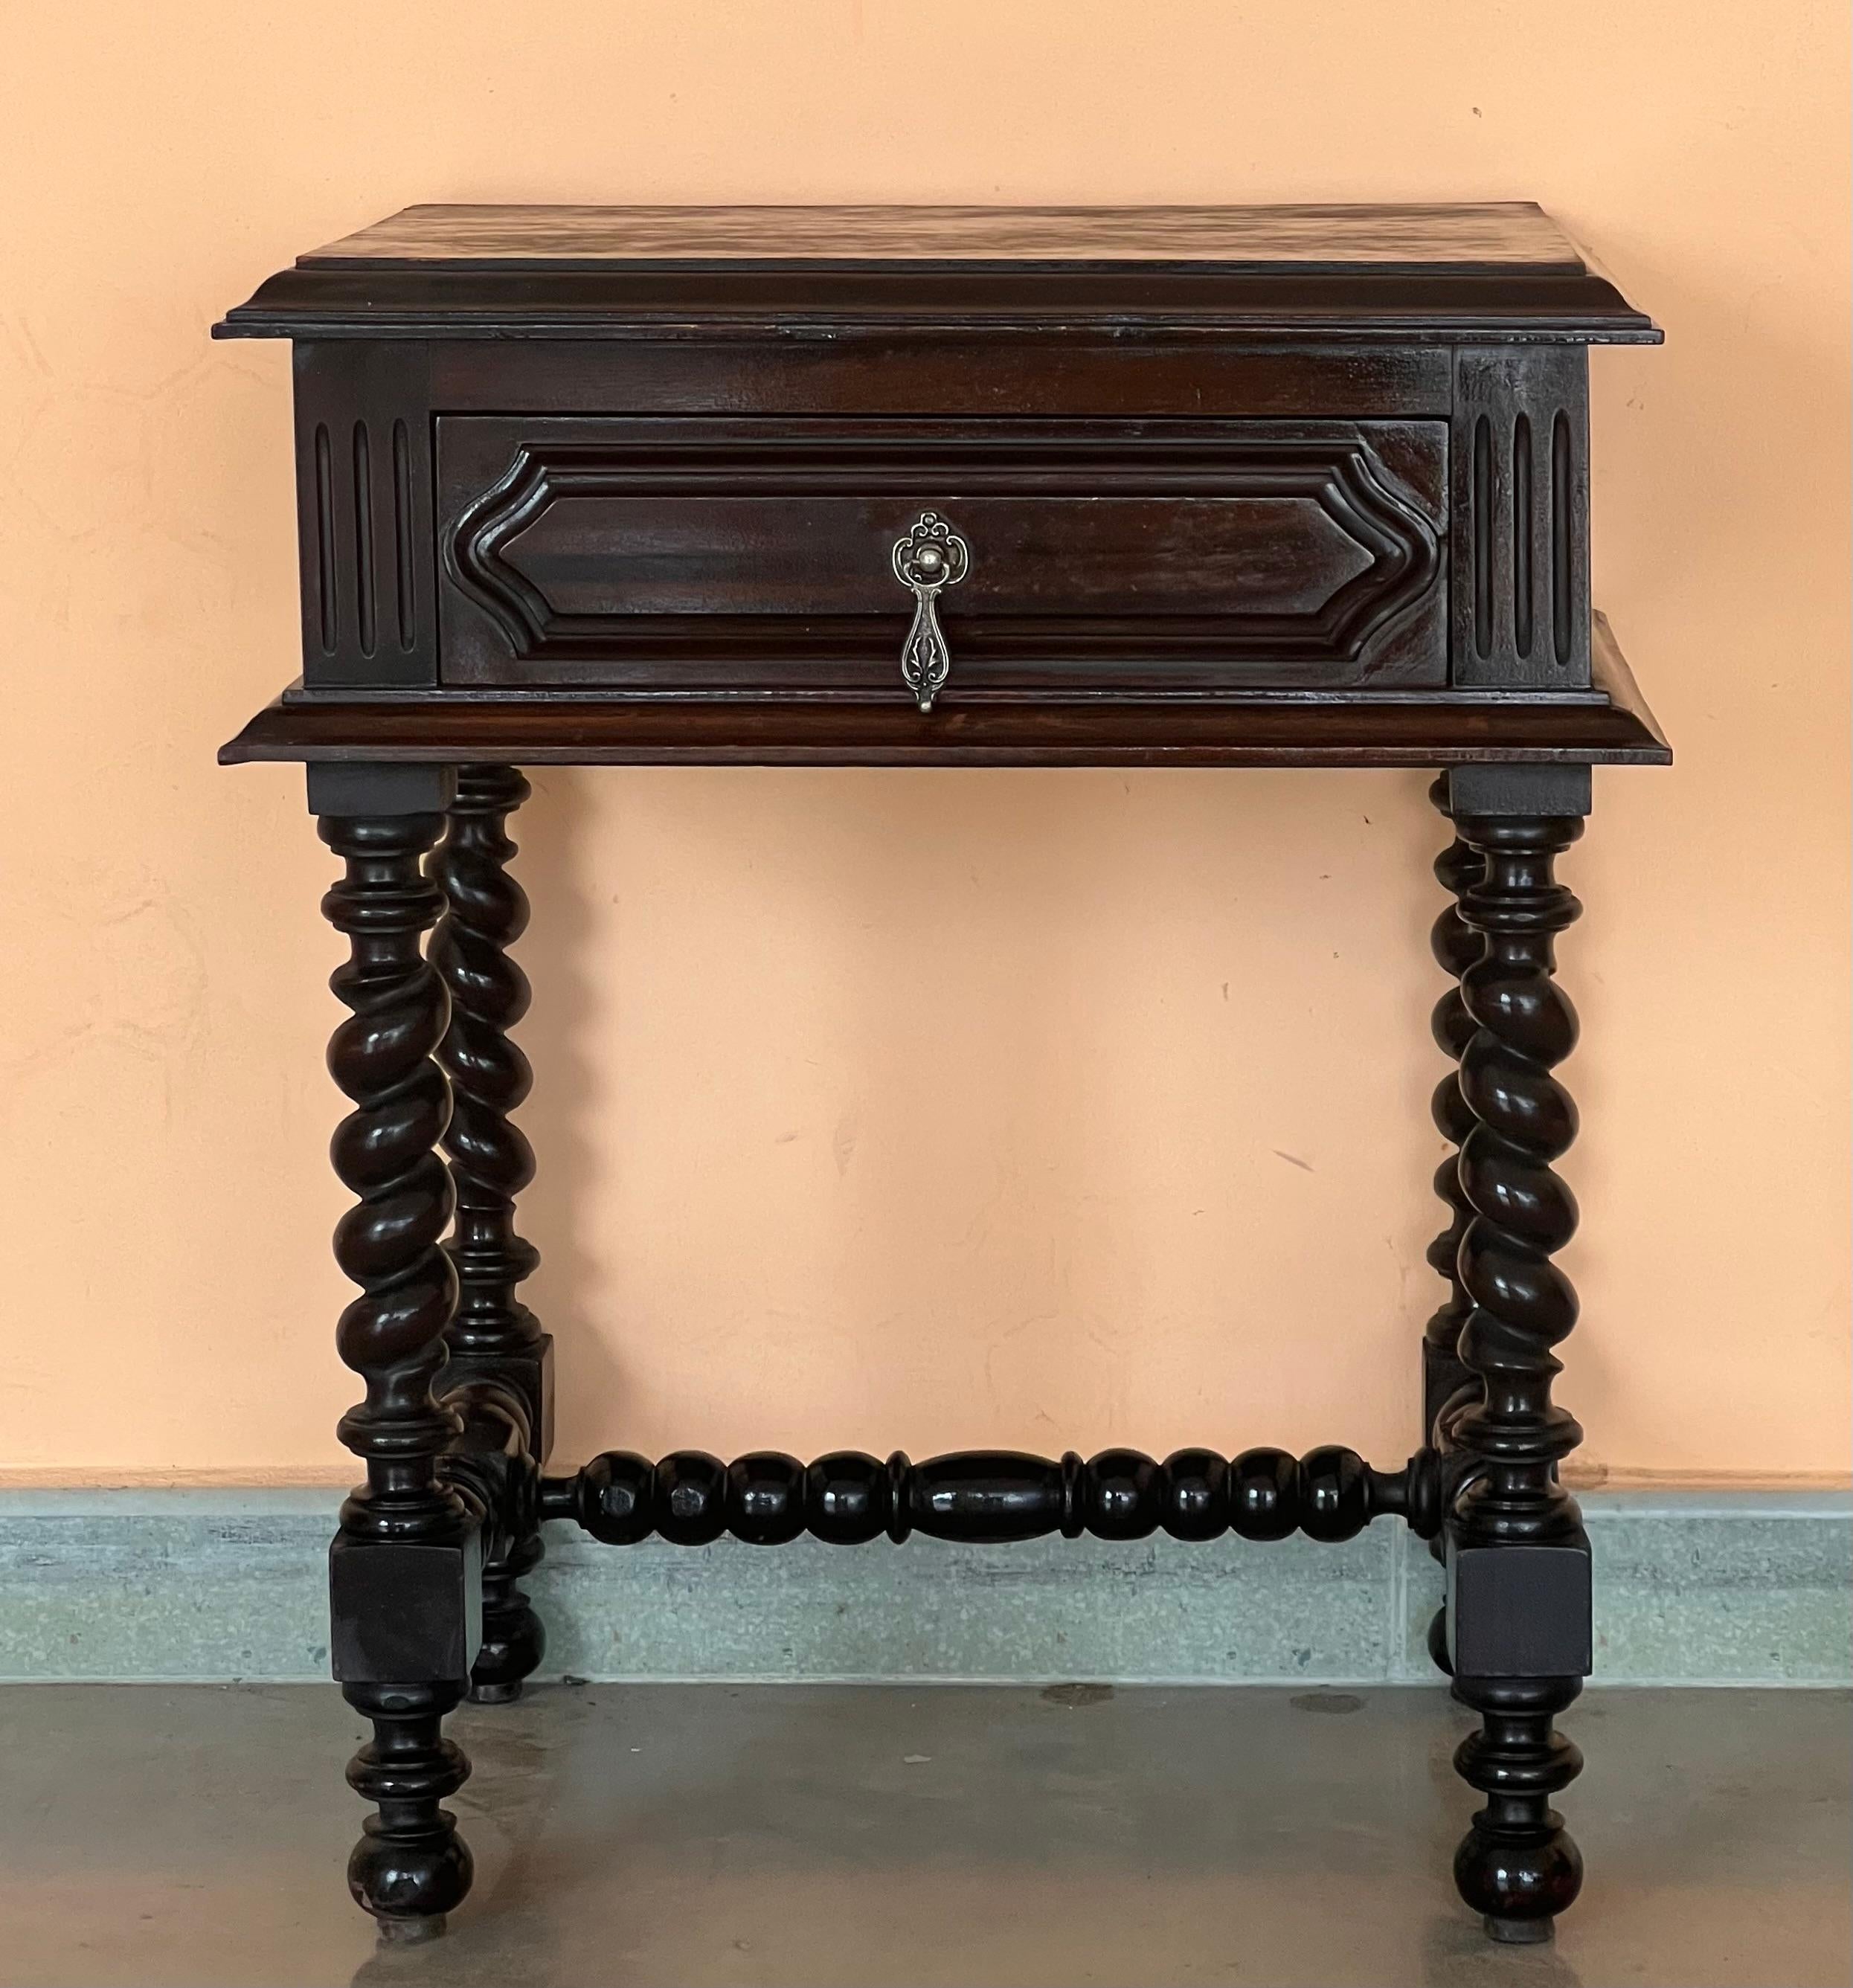 20th century pair of solid carved oak French nightstands with turned columns and stretcher.
It has one carved drawer with foliate reliefs and original hardware.